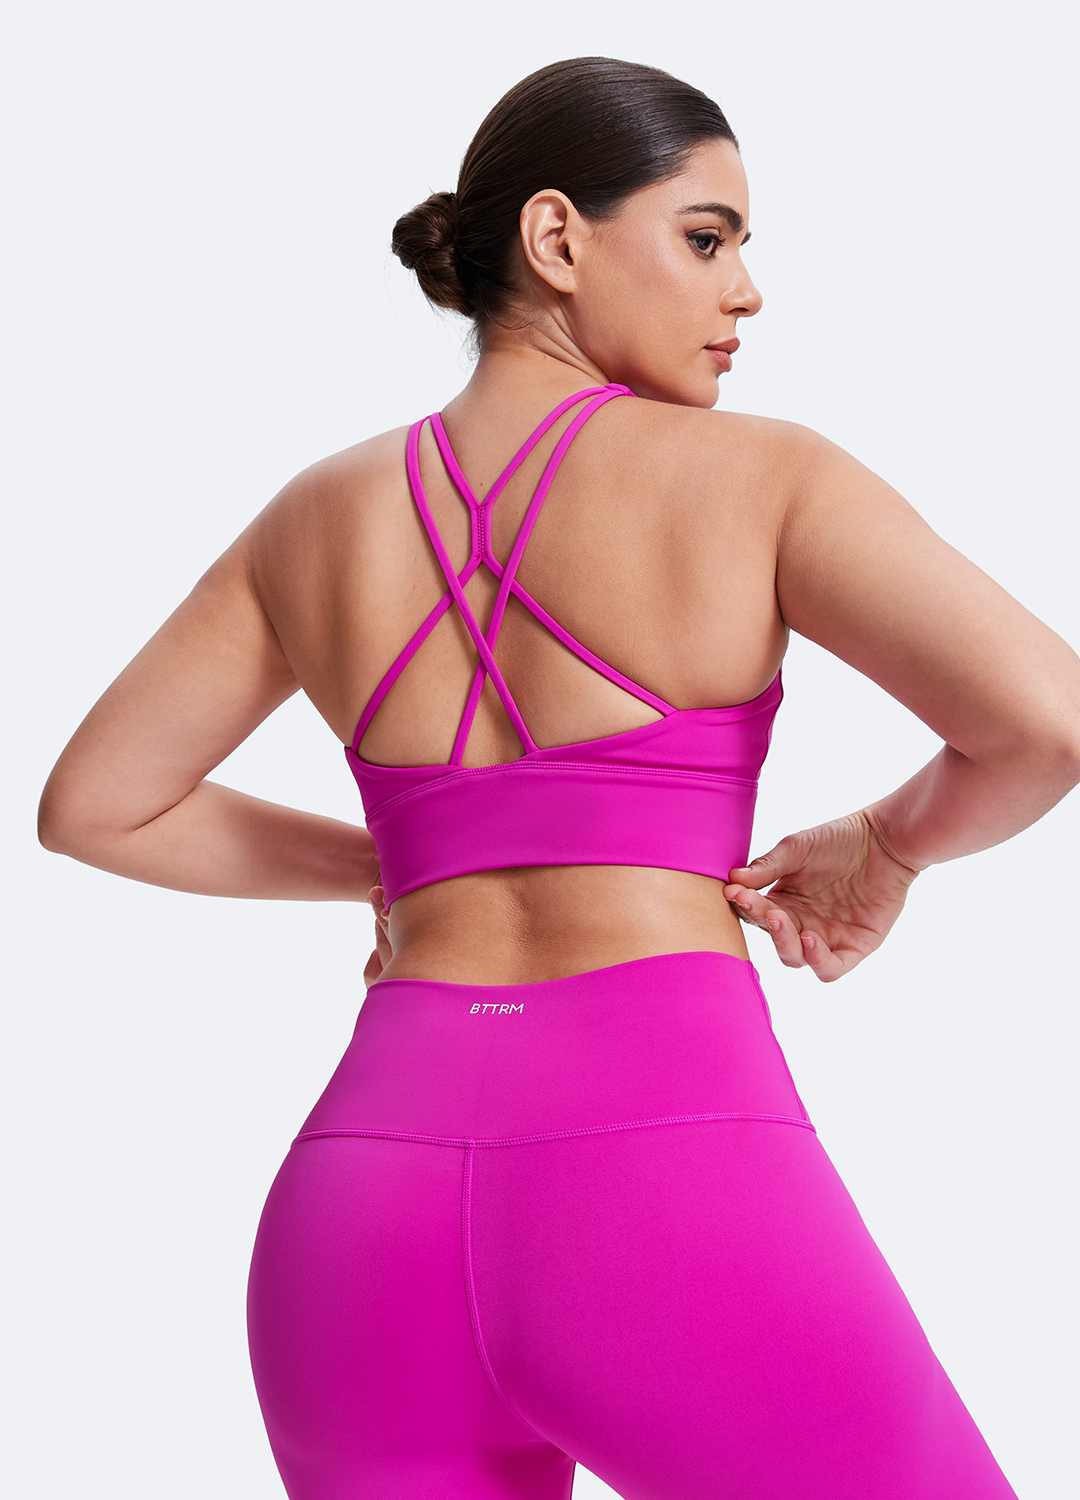 Straps and Support Bra & Pilates high-rise leggings set